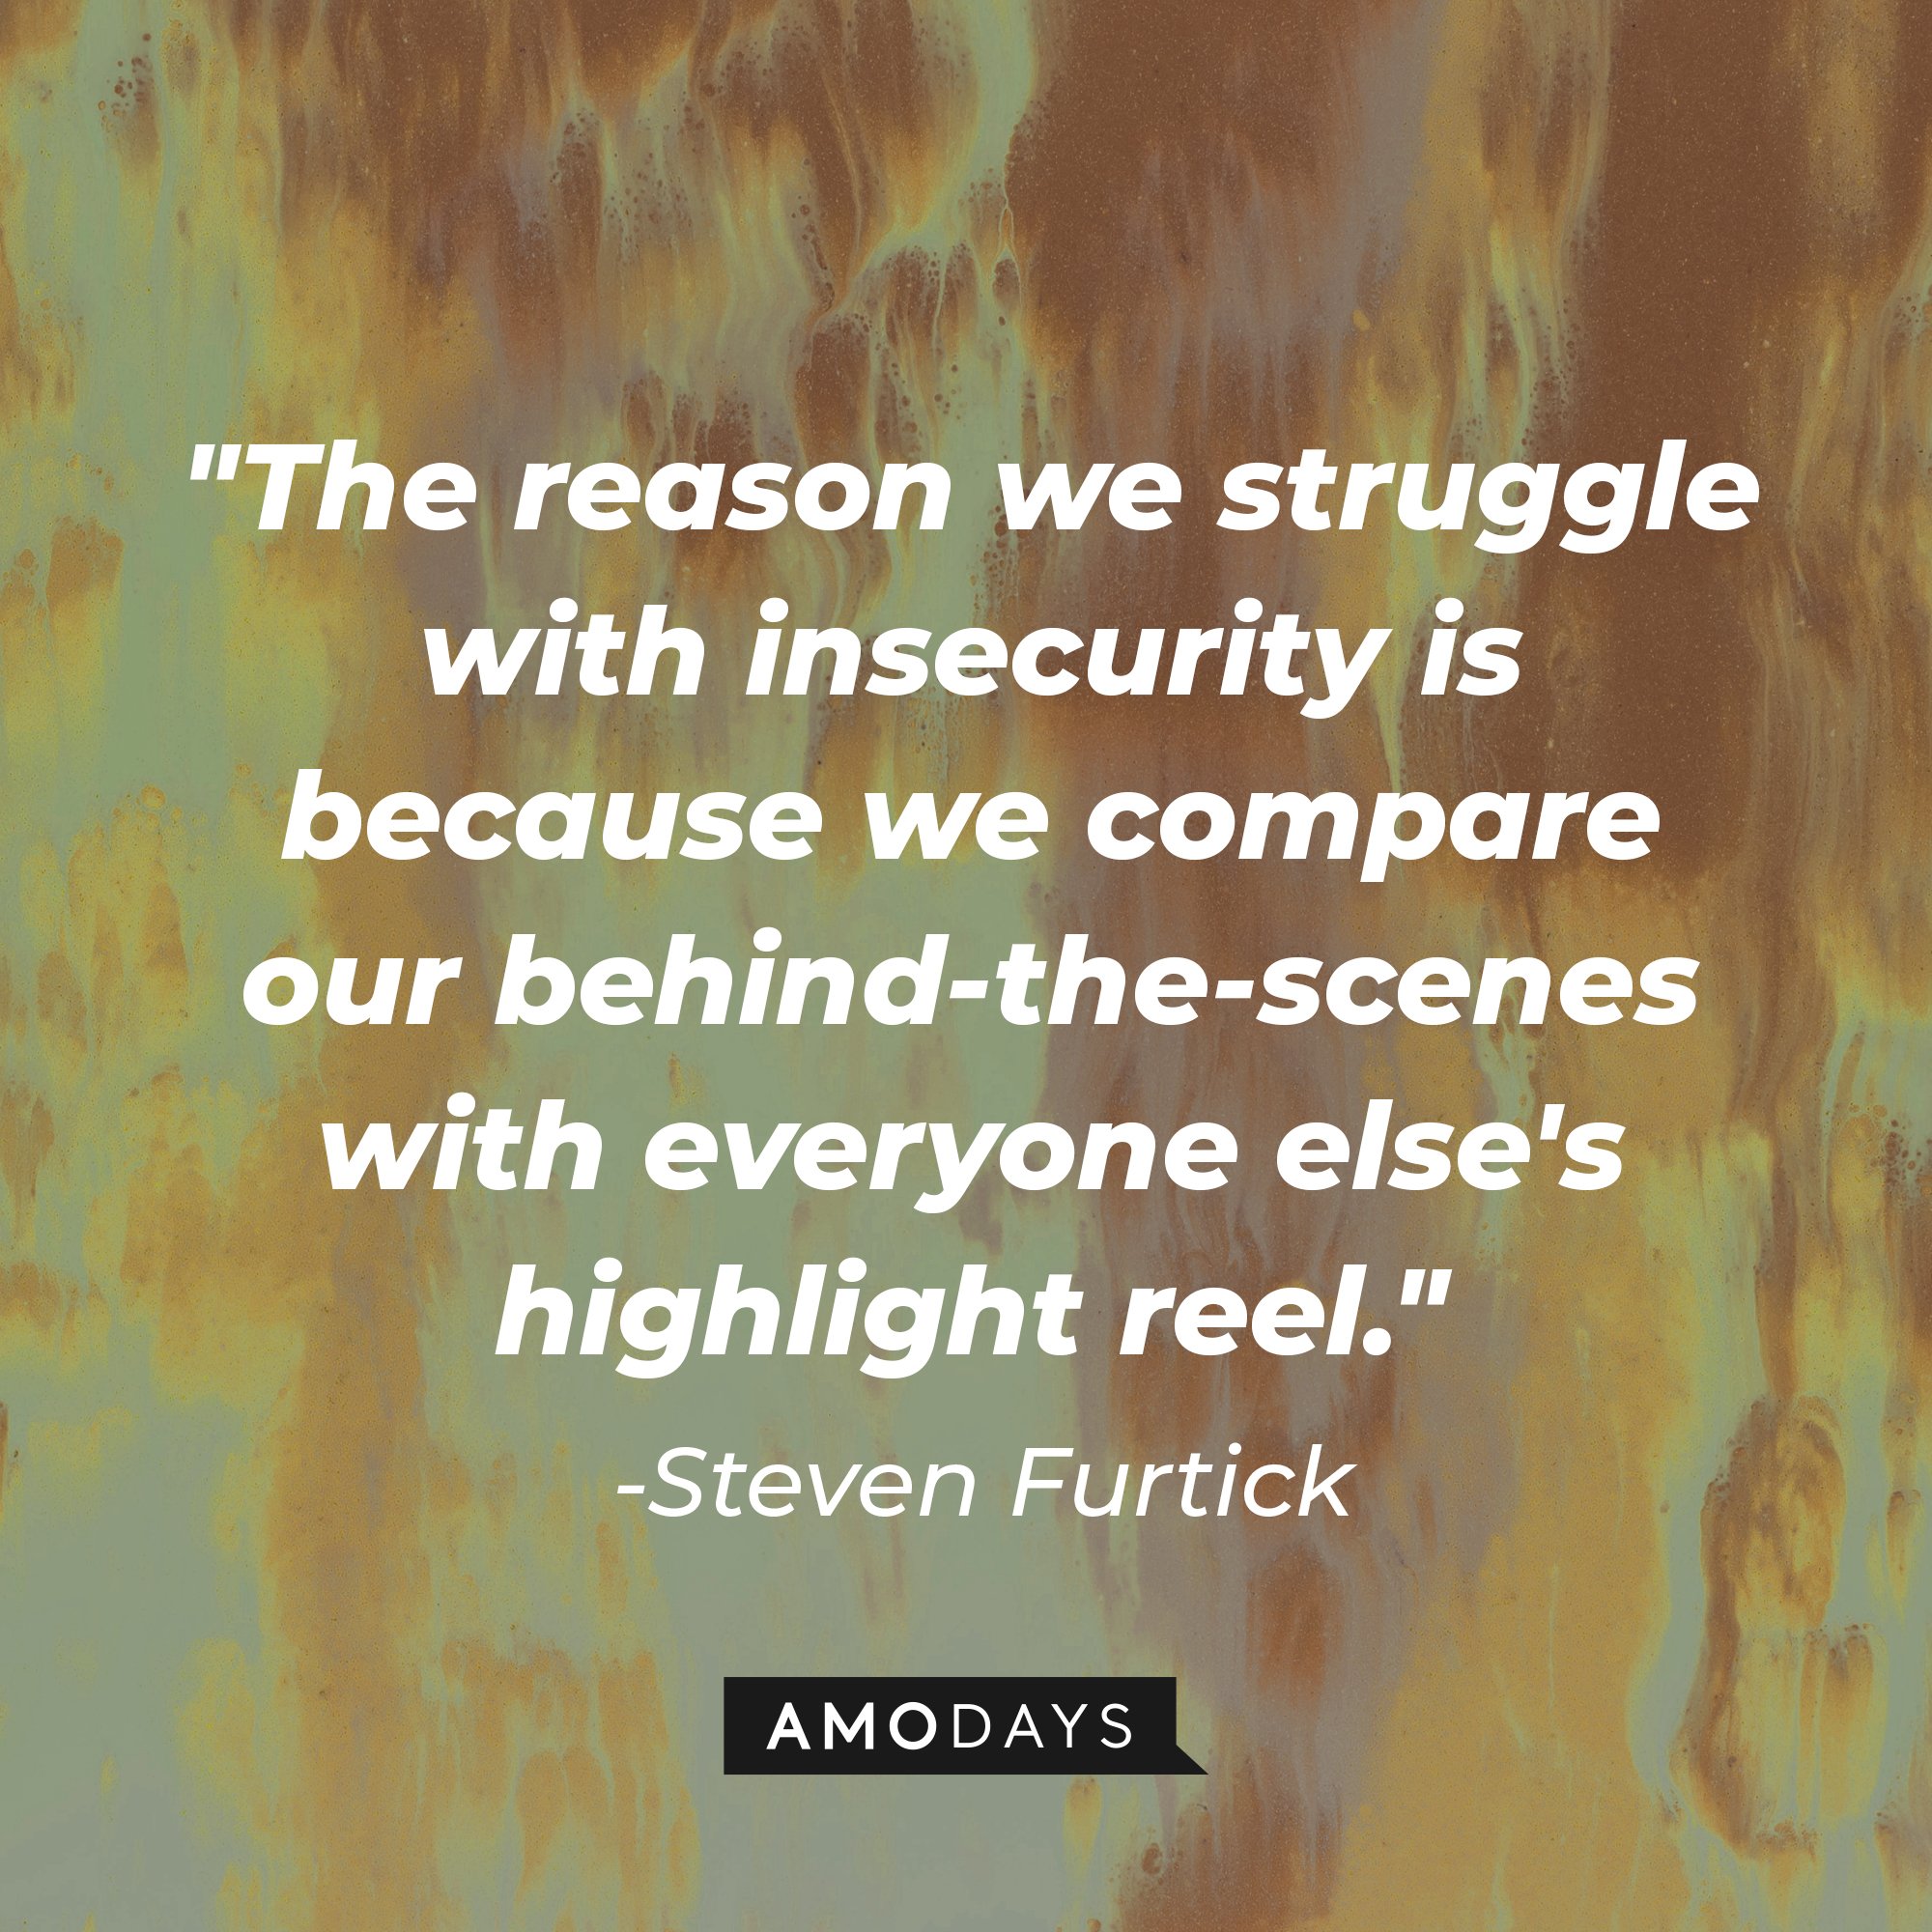  Steven Furtick’s quote: "The reason we struggle with insecurity is because we compare our behind-the-scenes with everyone else's highlight reel." | Image: AmoDays